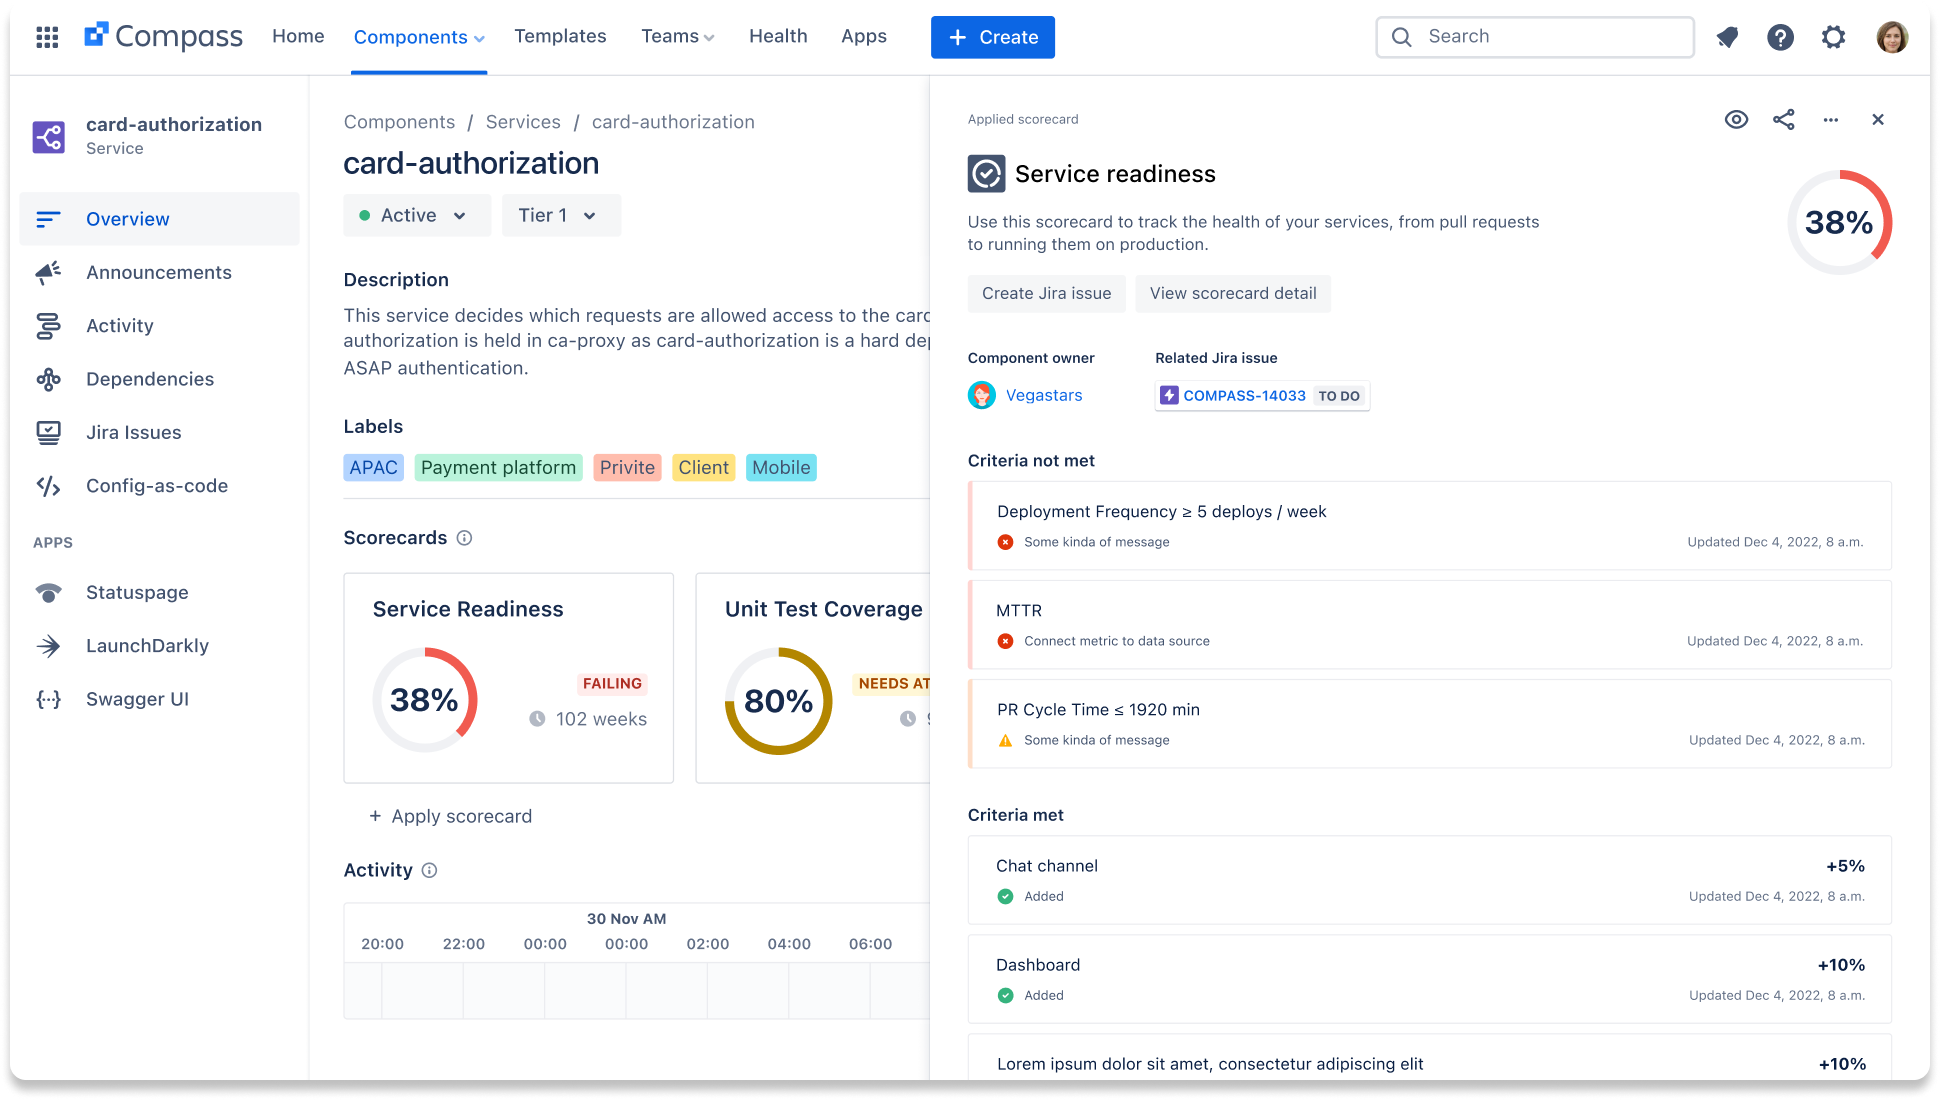 Build a better developer experience with Compass, Atlassian's new